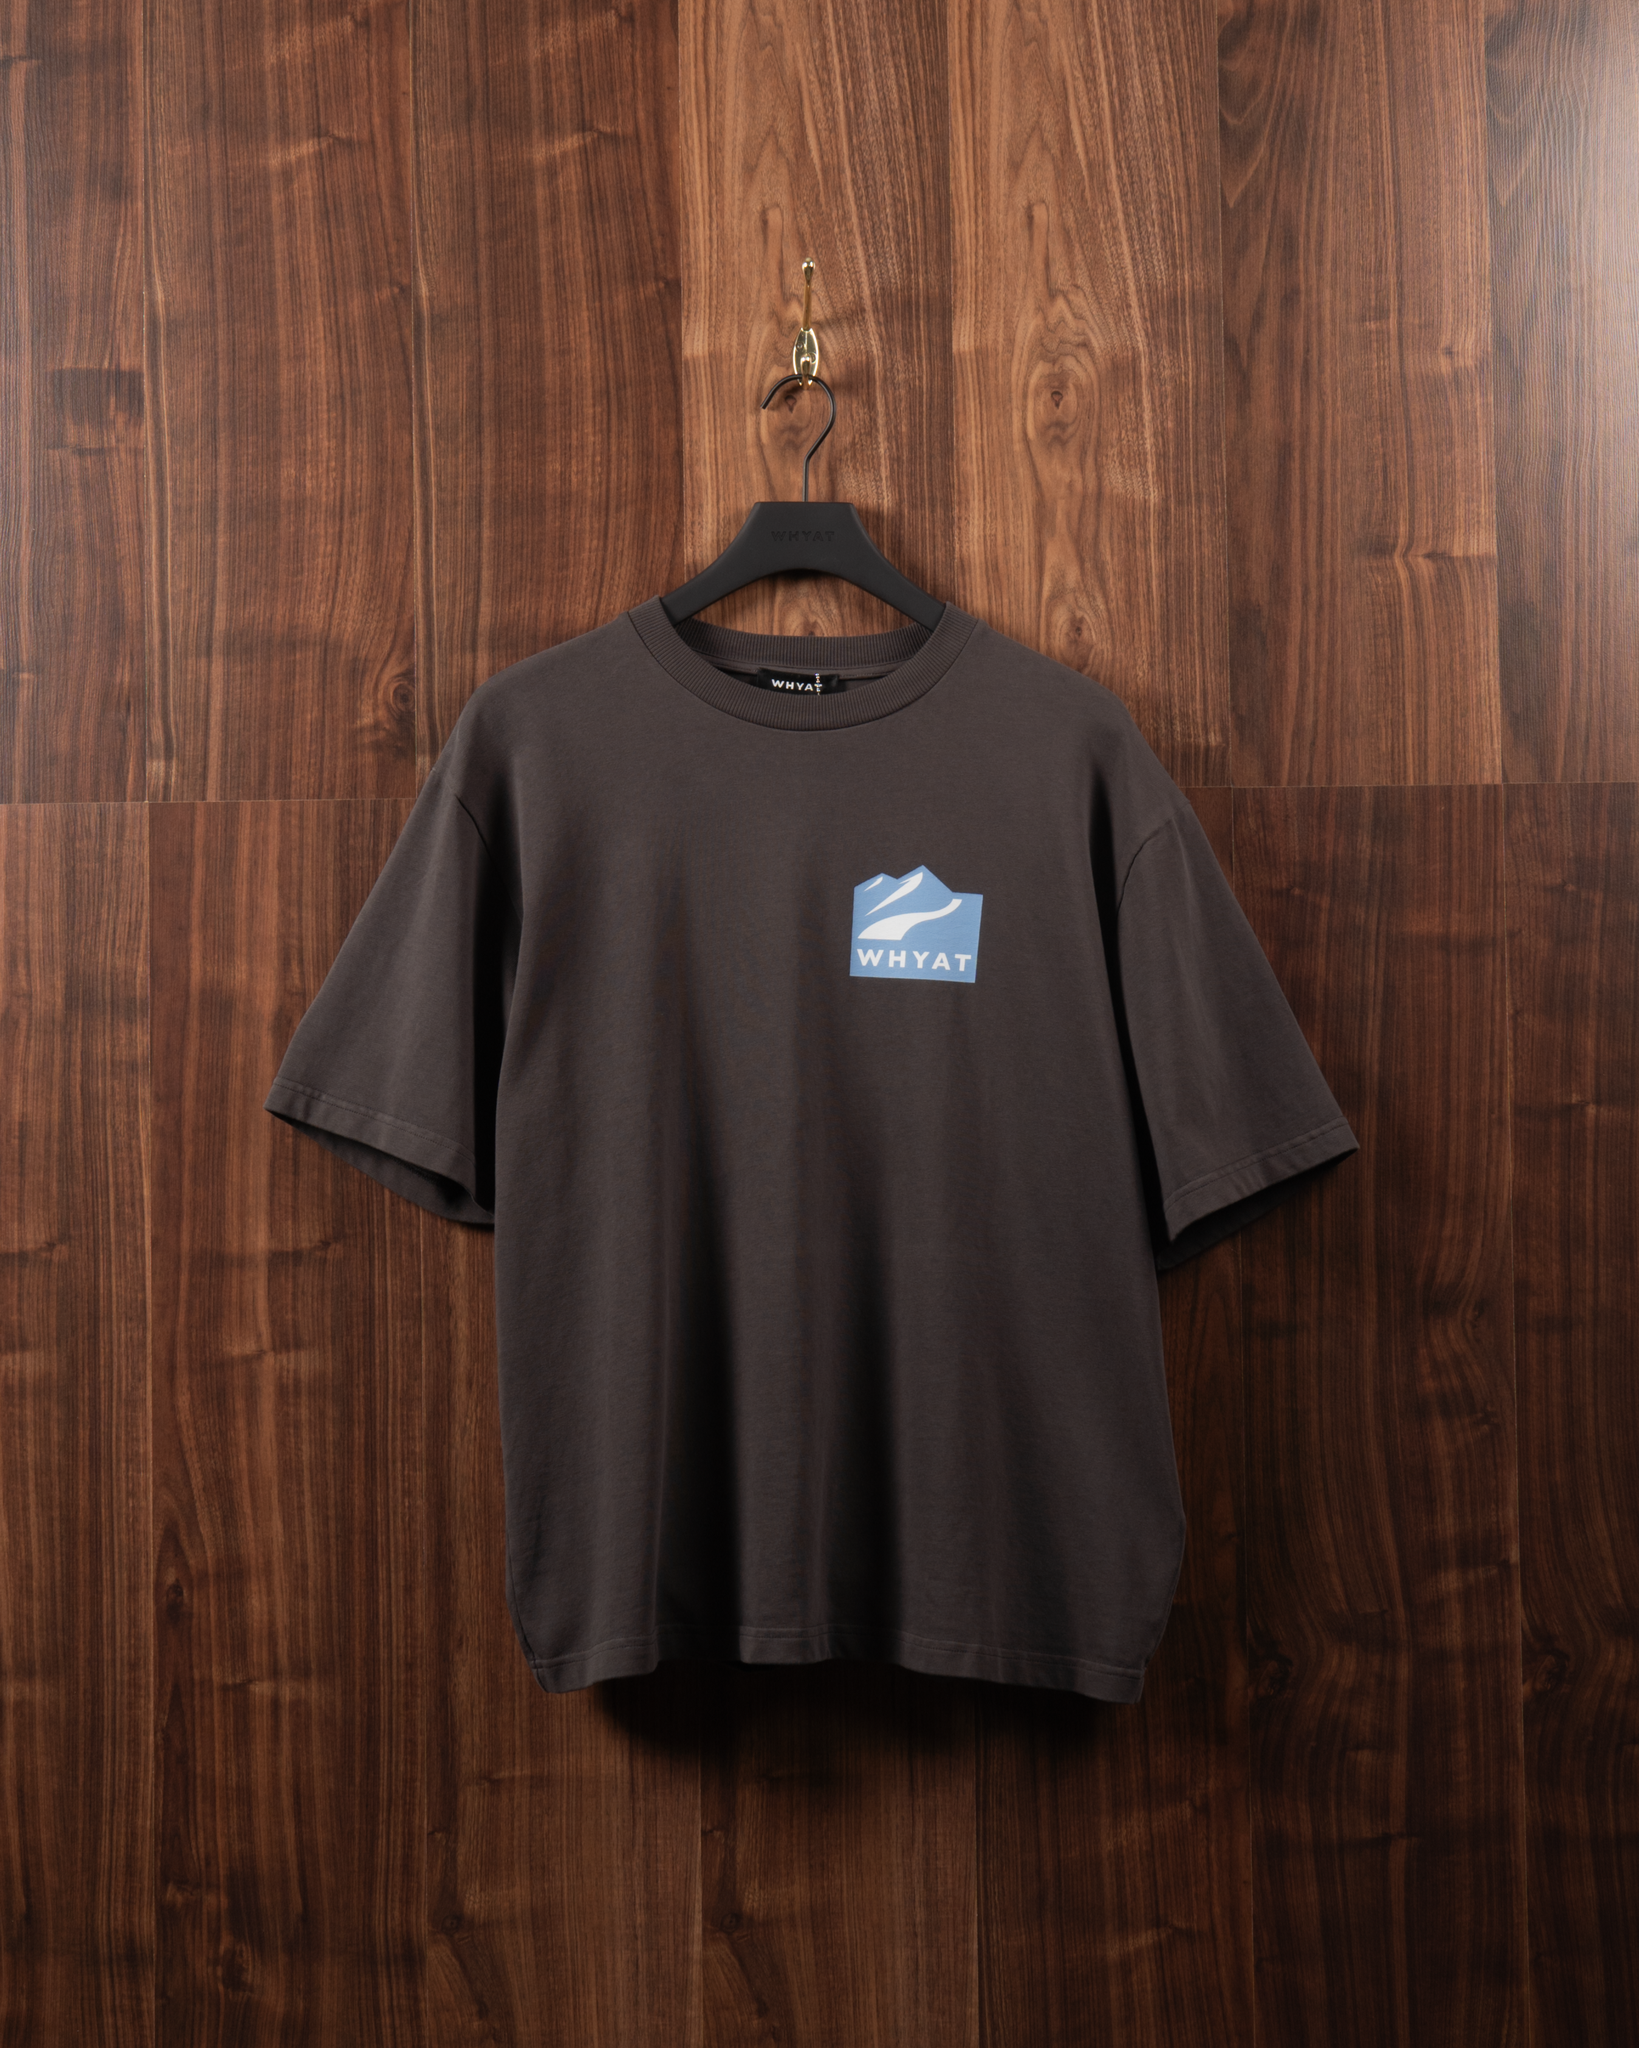 WHYAT TEE MOUTAIN -VINTAGE GREY